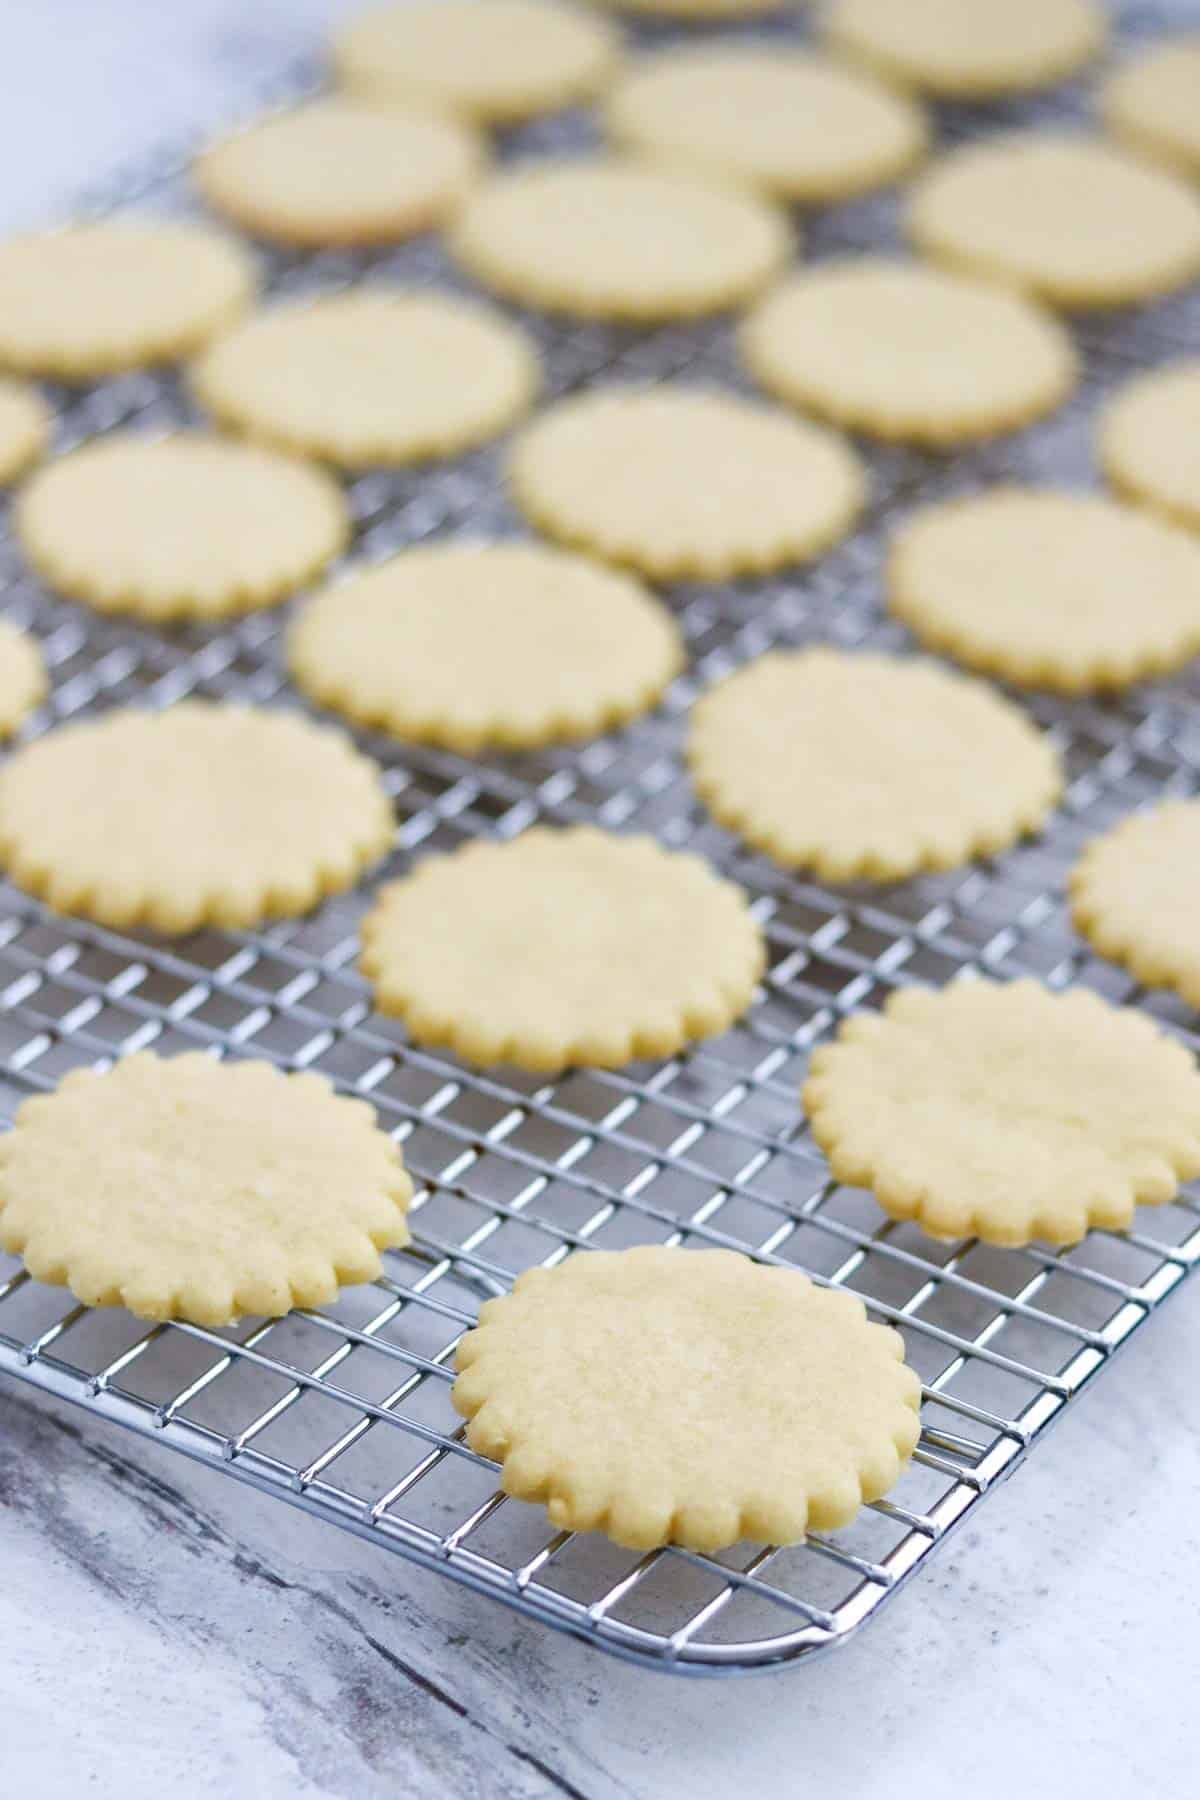 Baked but unfrosted Nordic Lemon Wafers on a cooling rack.